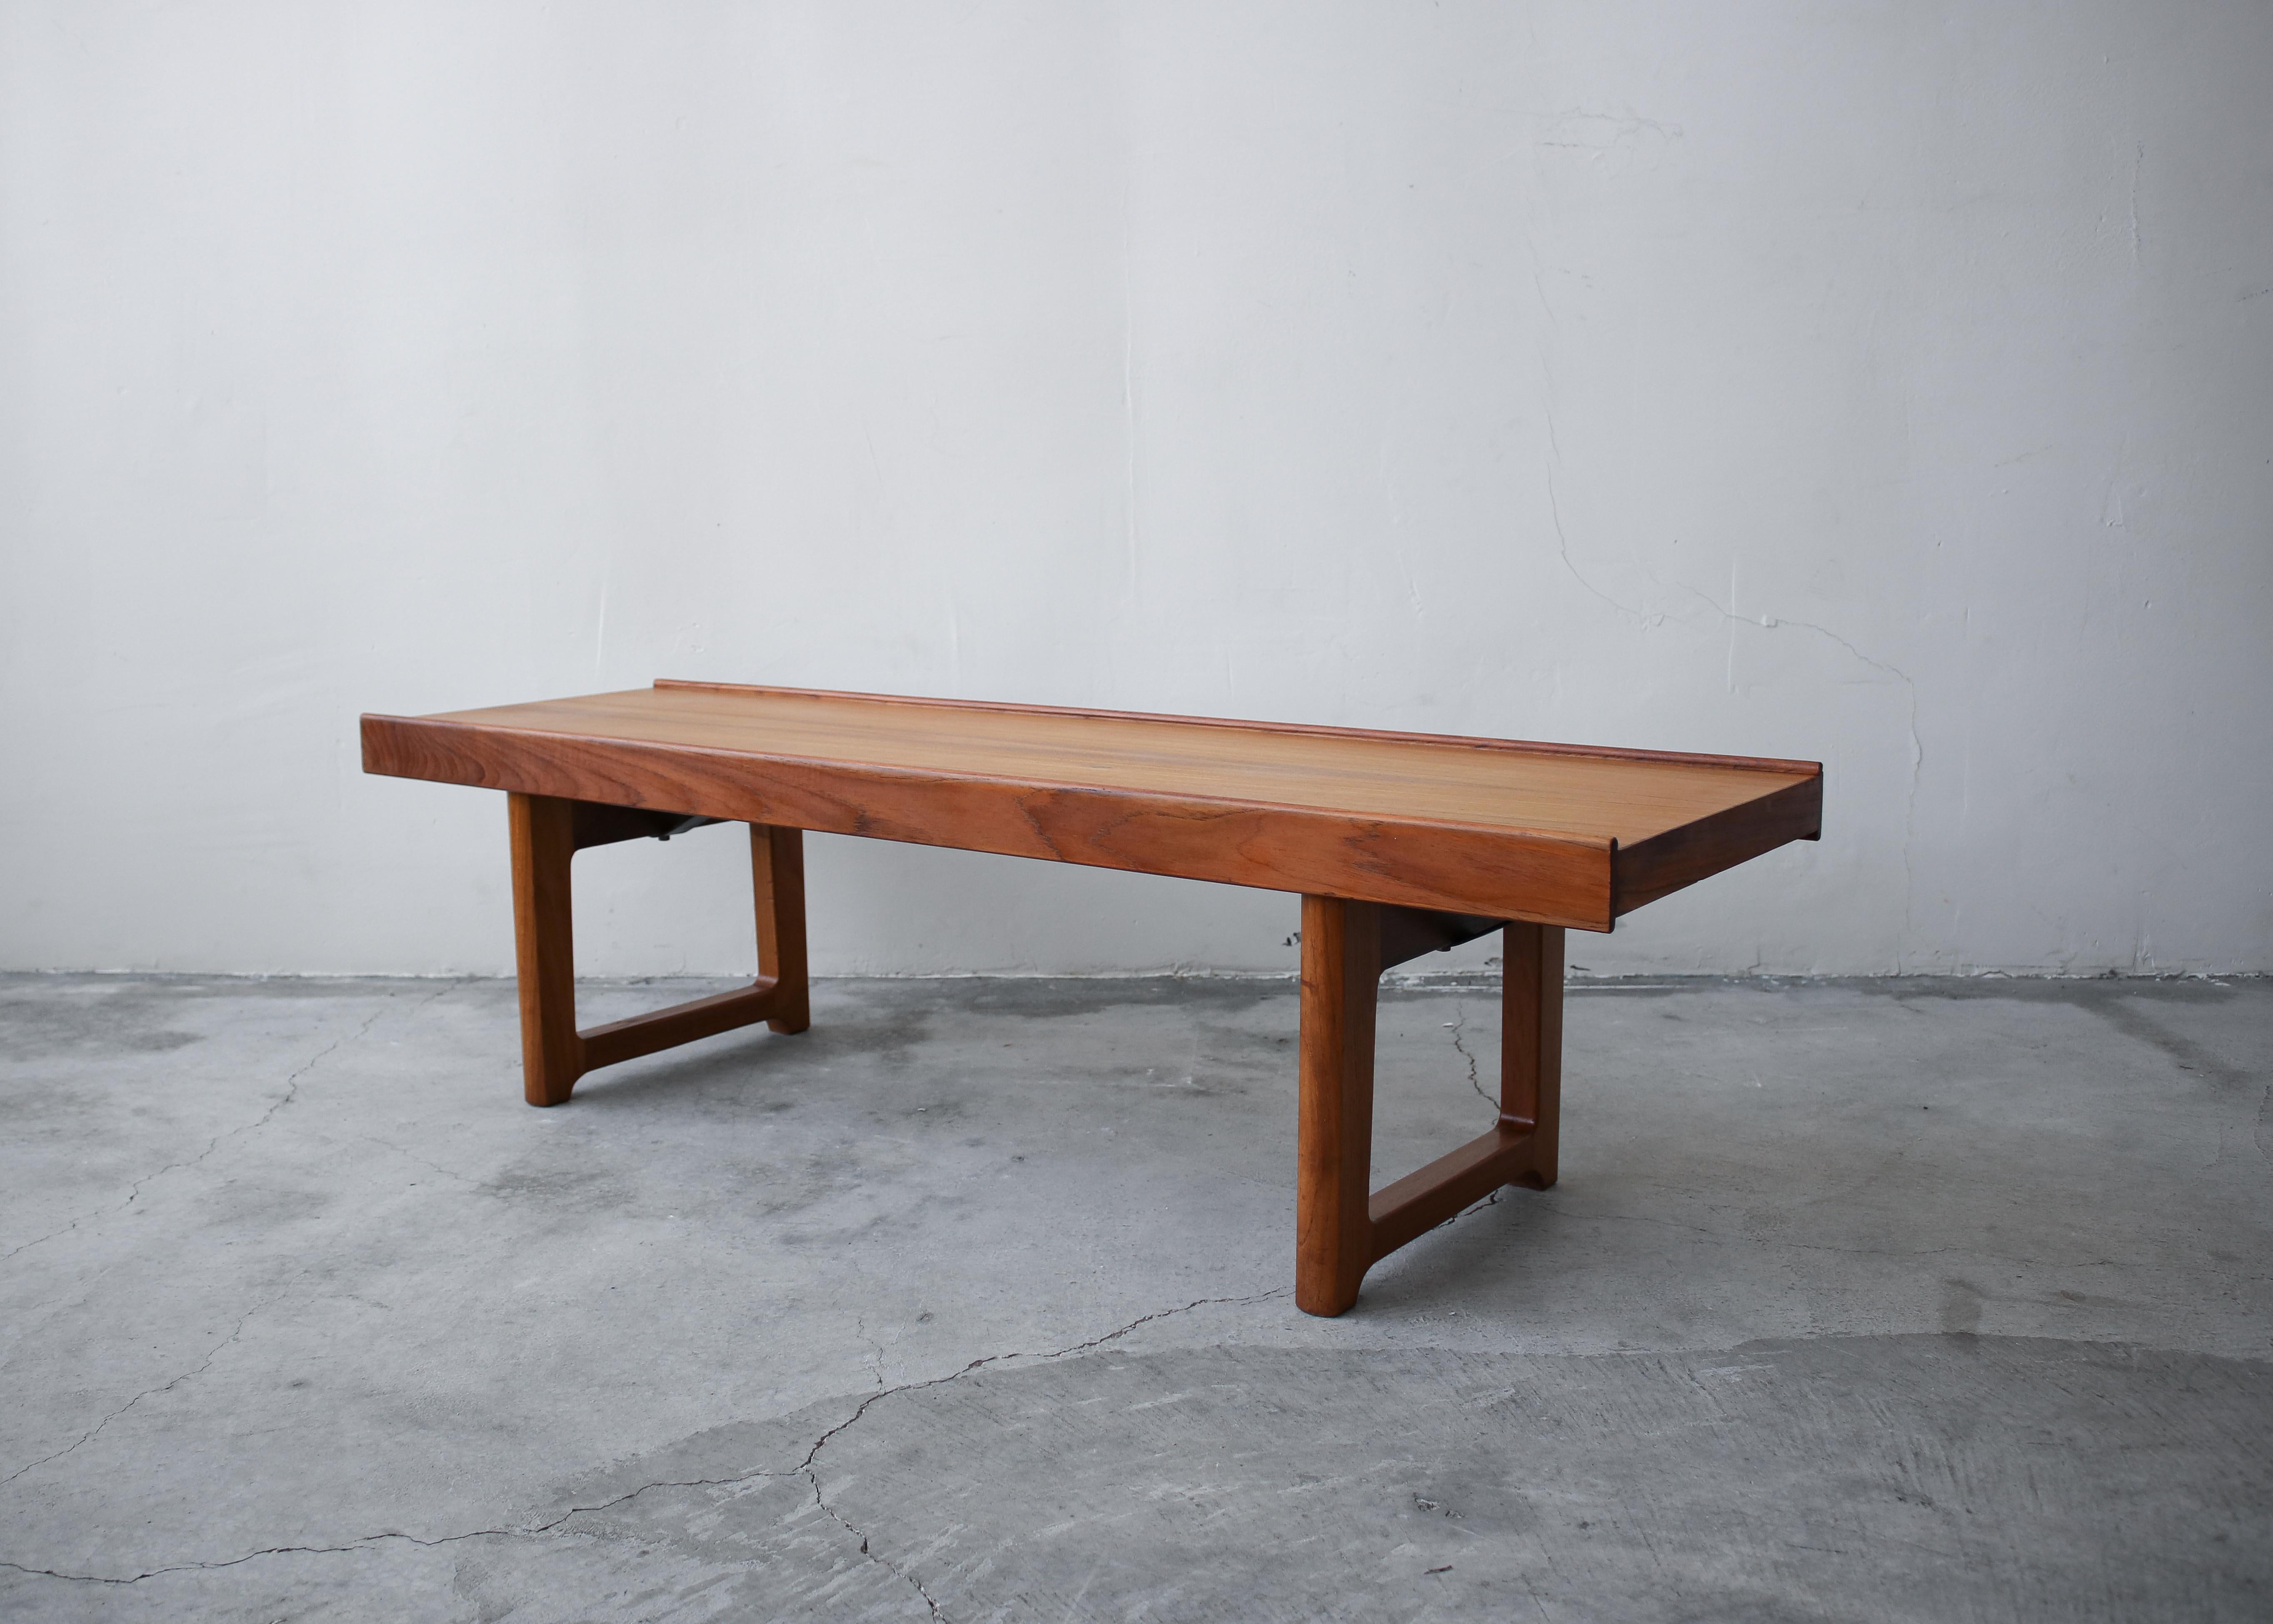 Original 1960s Danish teak Krobo bench by Torbjørn Afdal for Bruksbo. A simple yet versatile piece. Pretty enough to be used as mere decor but constructed with steel supports, so it can double as seating. The uses are endless.
 
See reference